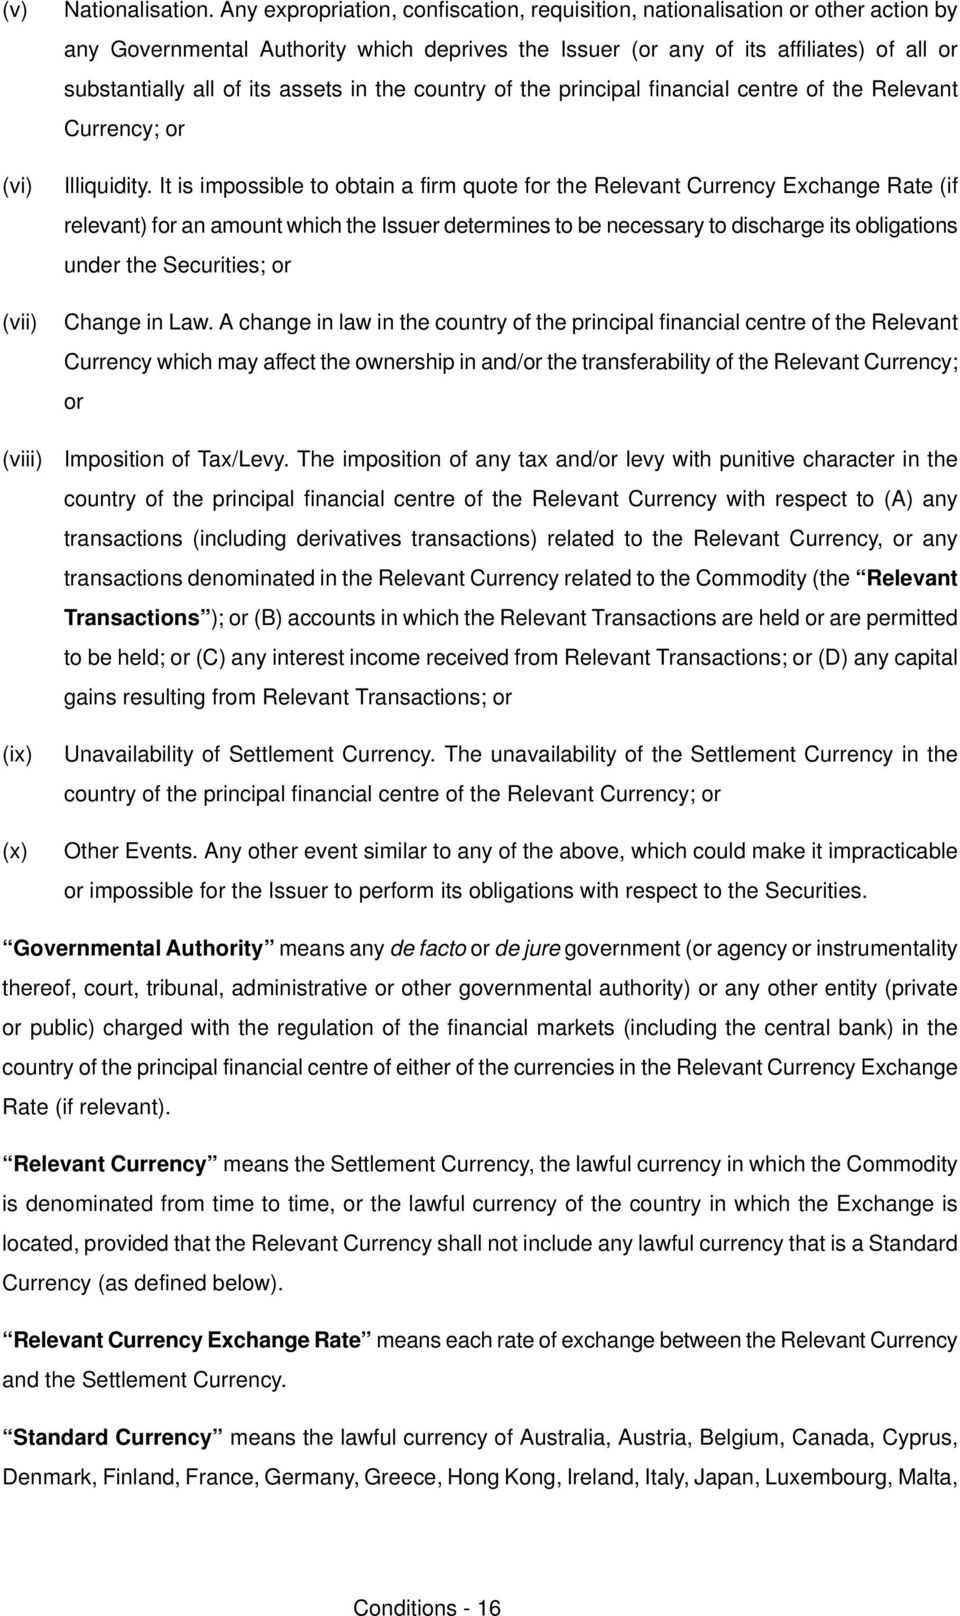 oelevant Currency bxchange oate Eif relevantf for an amount which the fssuer determines to be necessary to discharge its obligations under the pecuritiesx or Change in iawk A change in law in the